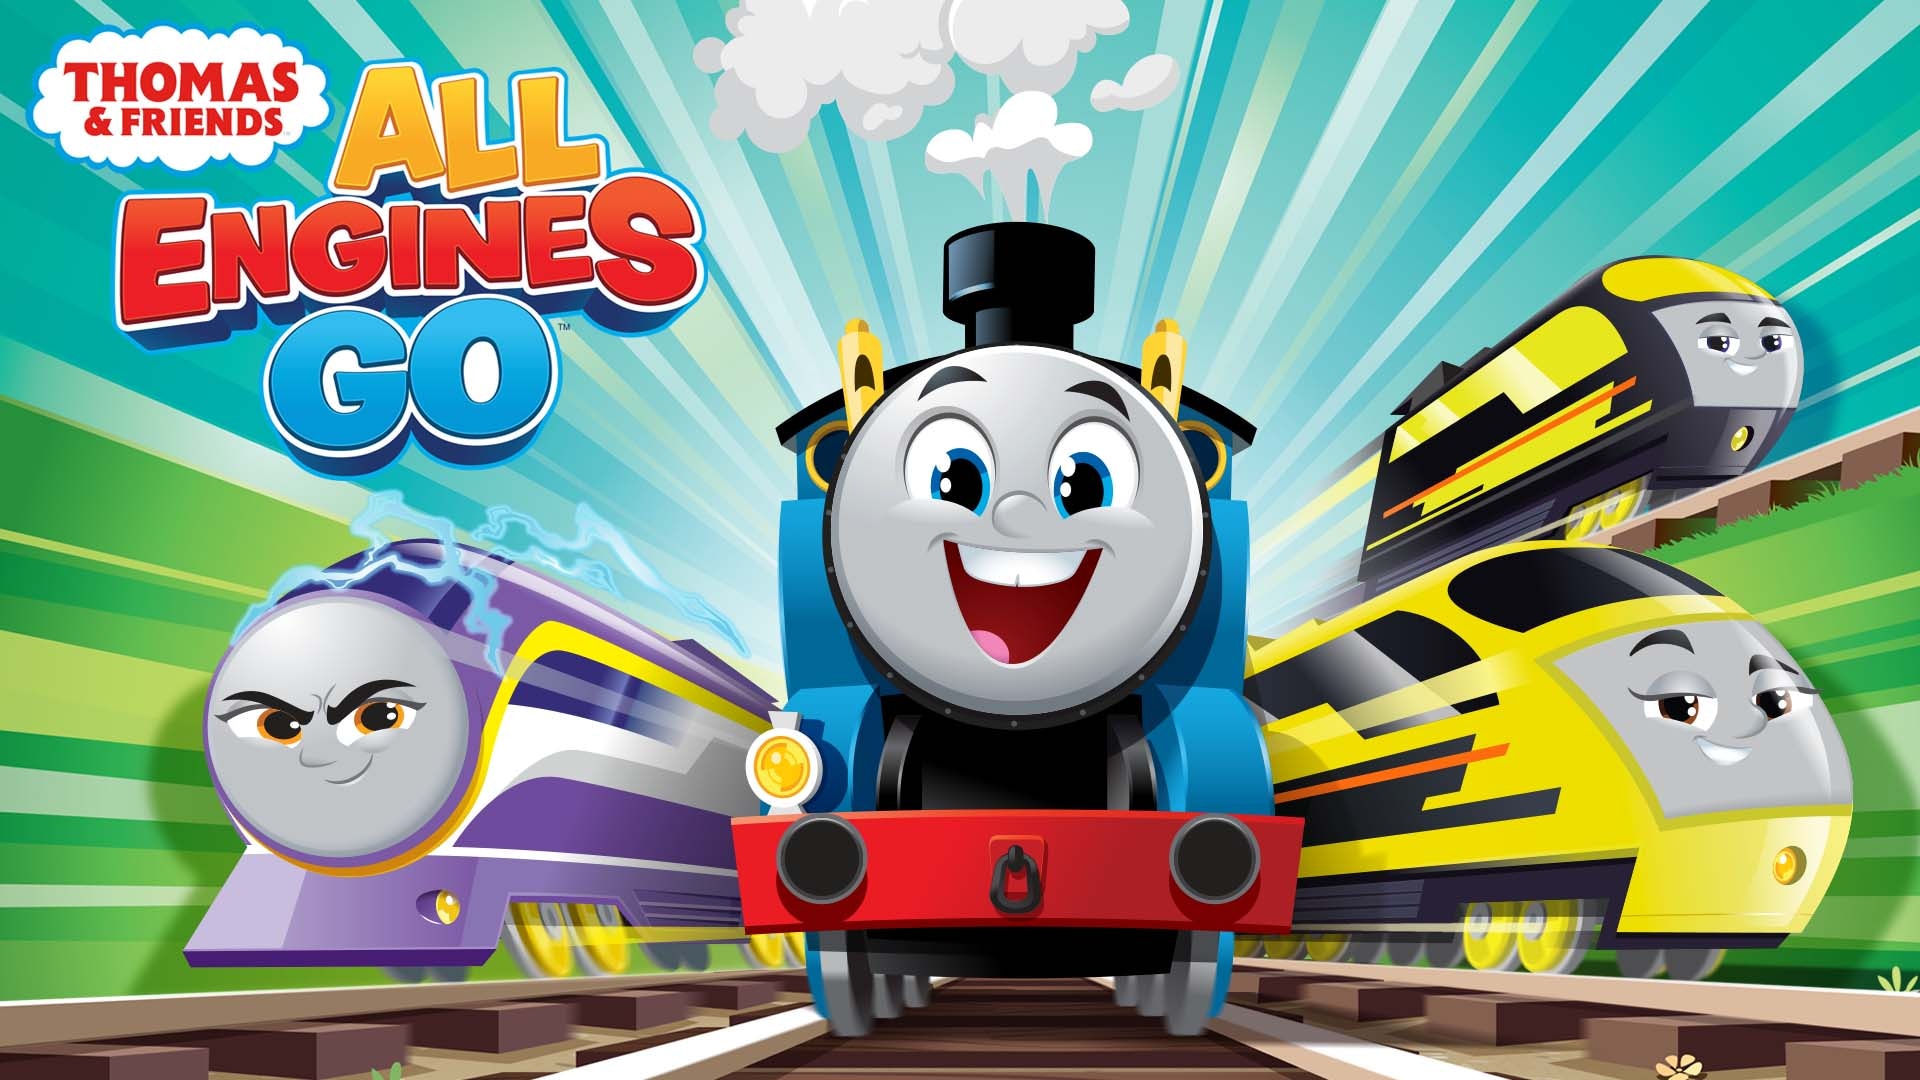 Watch Thomas & Friends: All Engines Go Season 1 Online Full Episodes